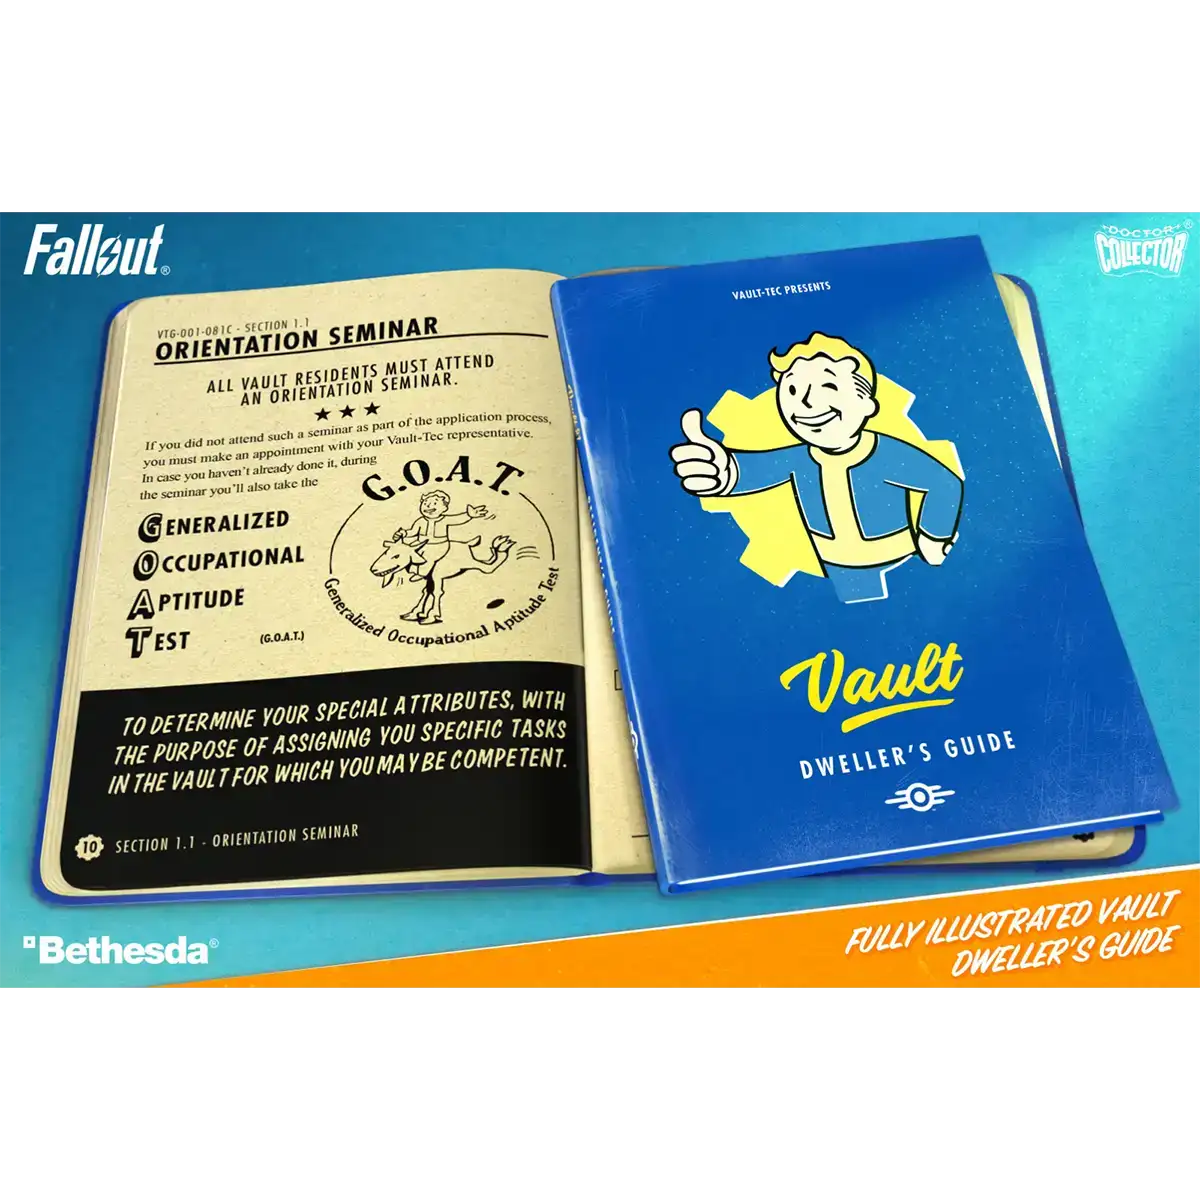 Fallout "Vault Dweller´s Welcome Kit" Image 8